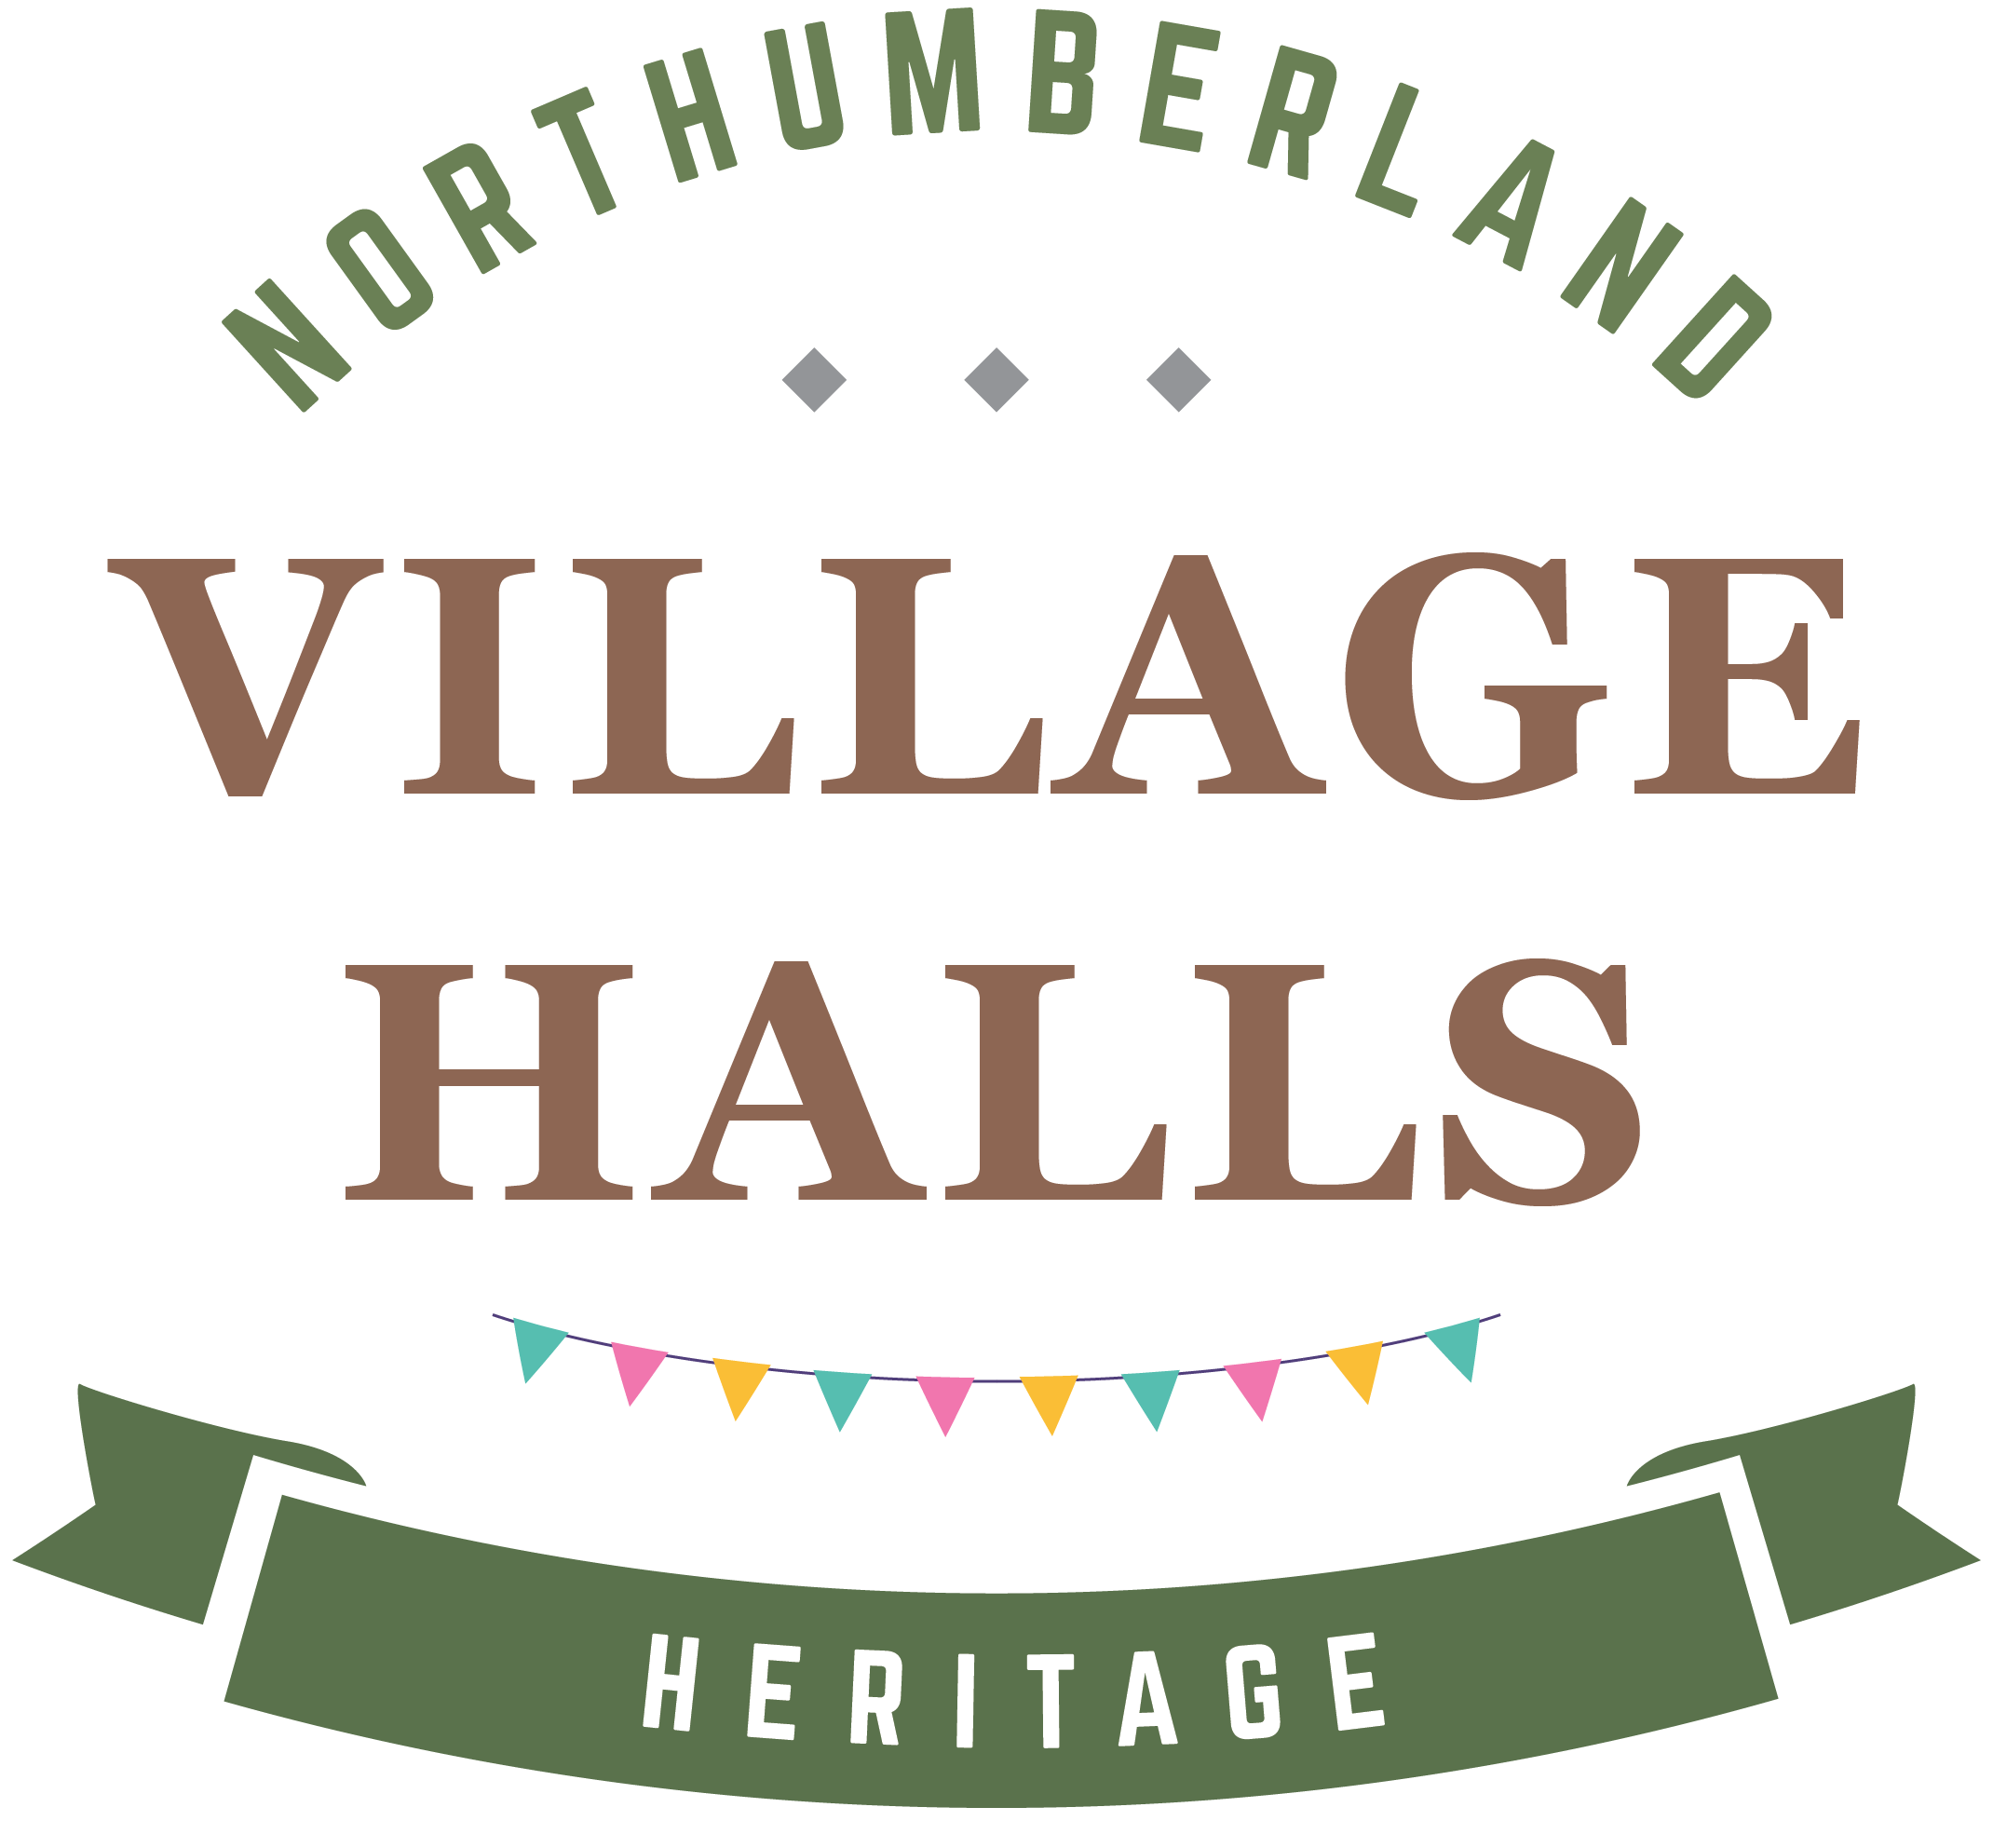 Northumberland Heritage of Village Halls website launched featured image